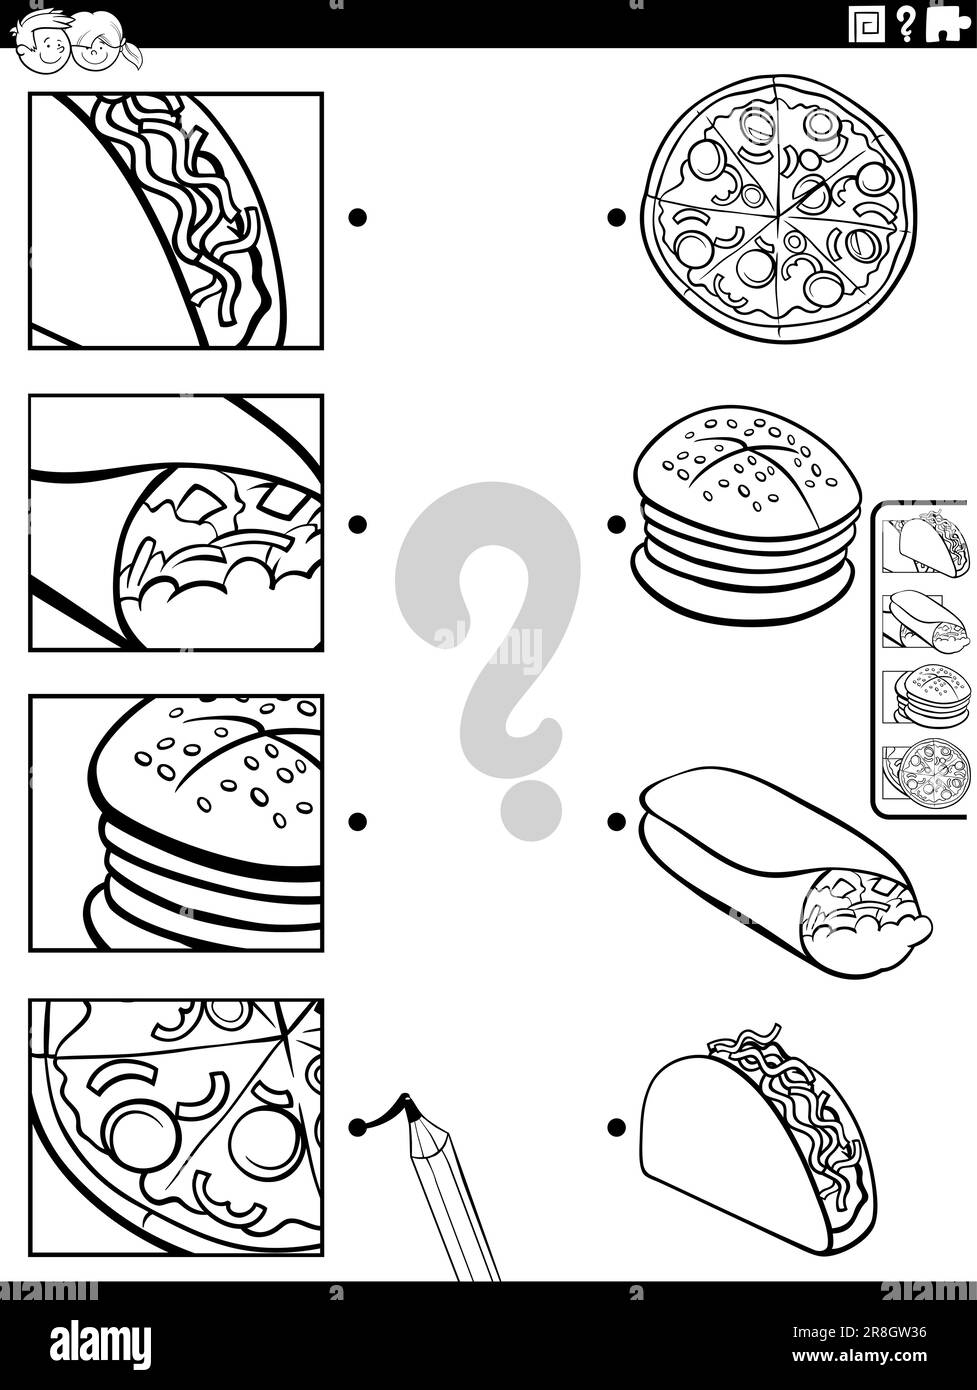 Black and white cartoon illustration of educational matching game with dishes or food objects and pictures clippings coloring page Stock Vector